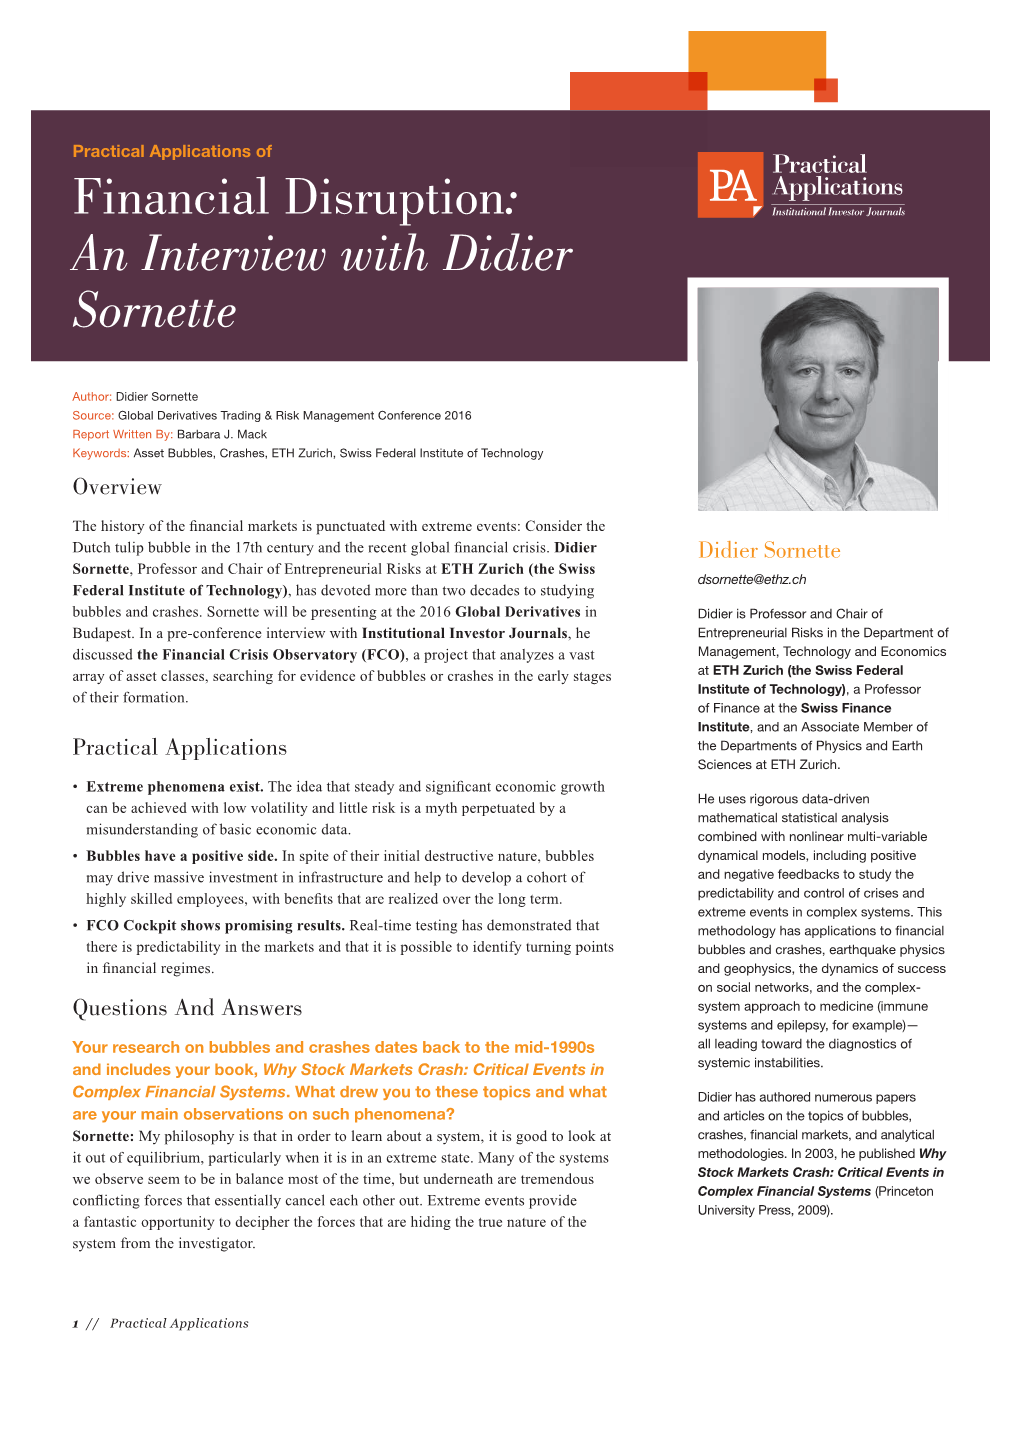 Financial Disruption: an Interview with Didier Sornette